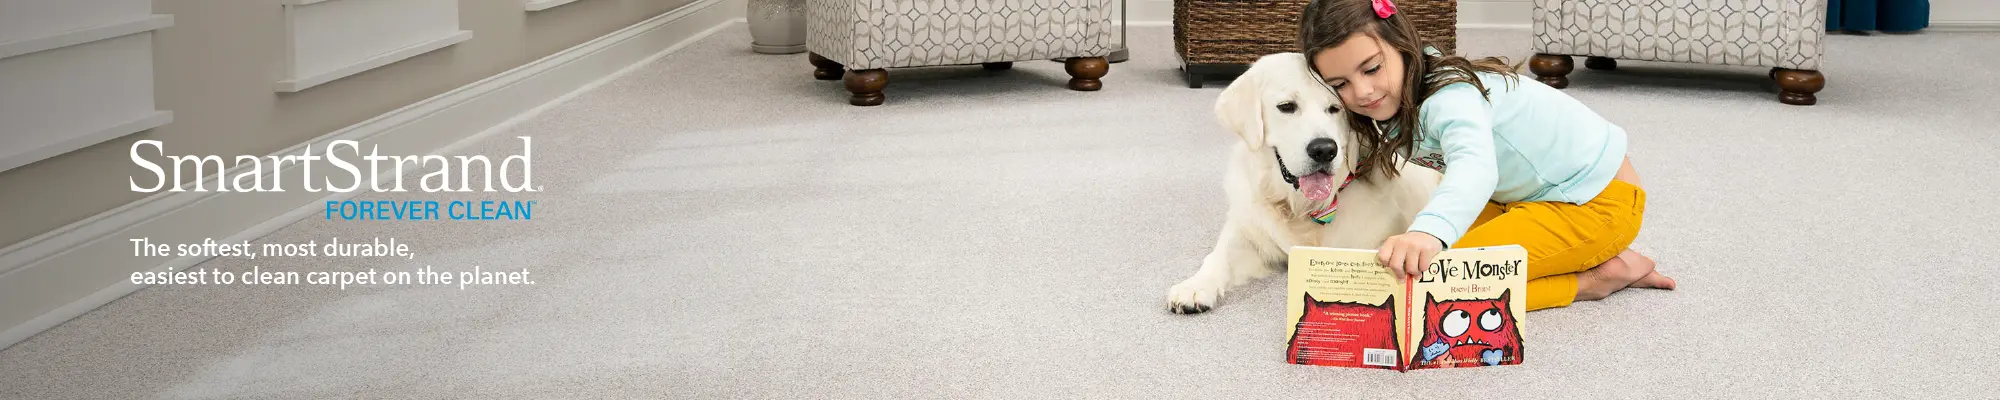 Browse Mohawk SmartStrand products from Pandolfi House of Carpets & Flooring in Springfield, PA